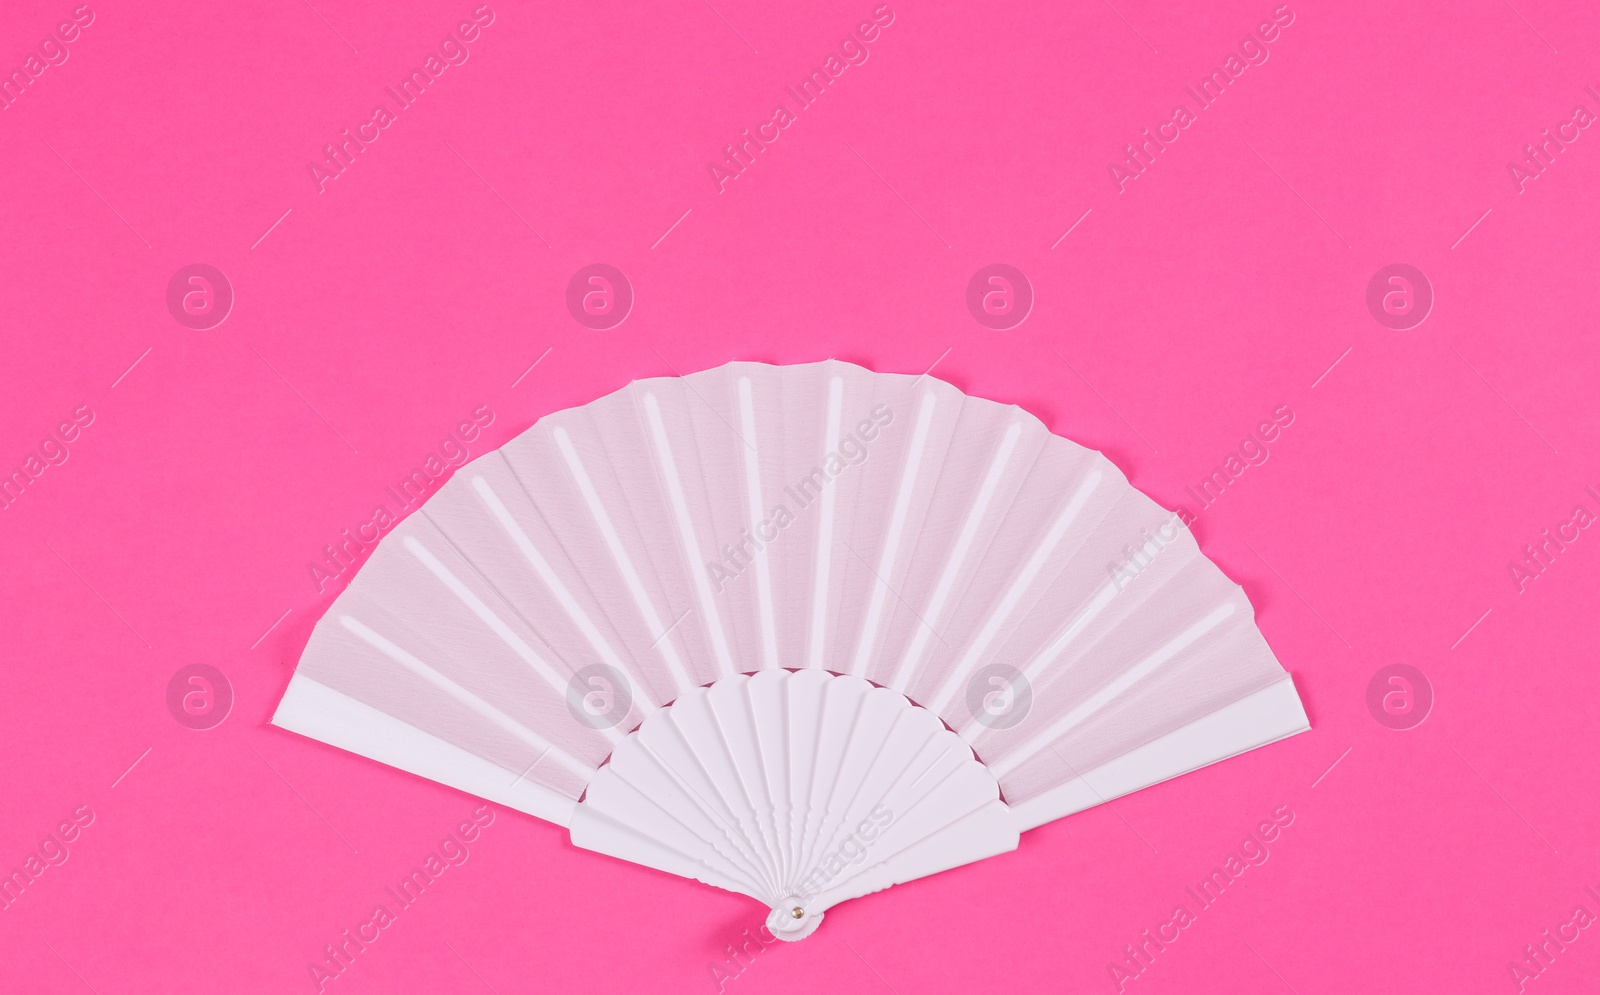 Photo of White hand fan on pink background, top view